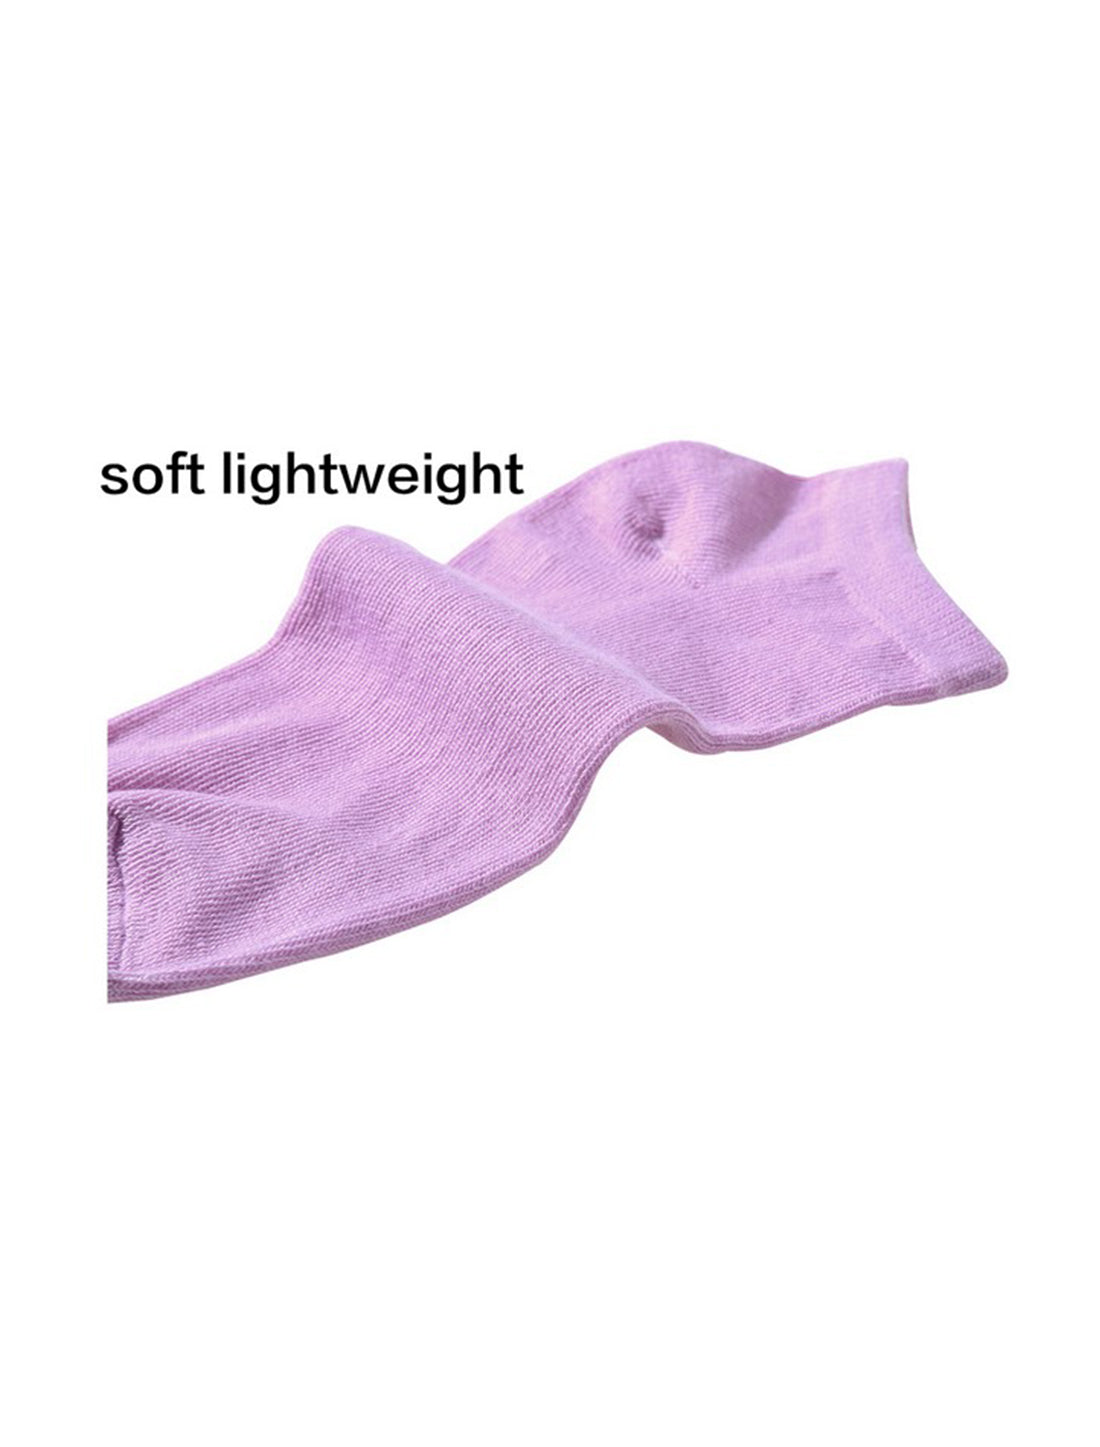 Allegra K Athletic Low Cut Ankle Socks-Stretch Cuffs Soft 10 Pairs